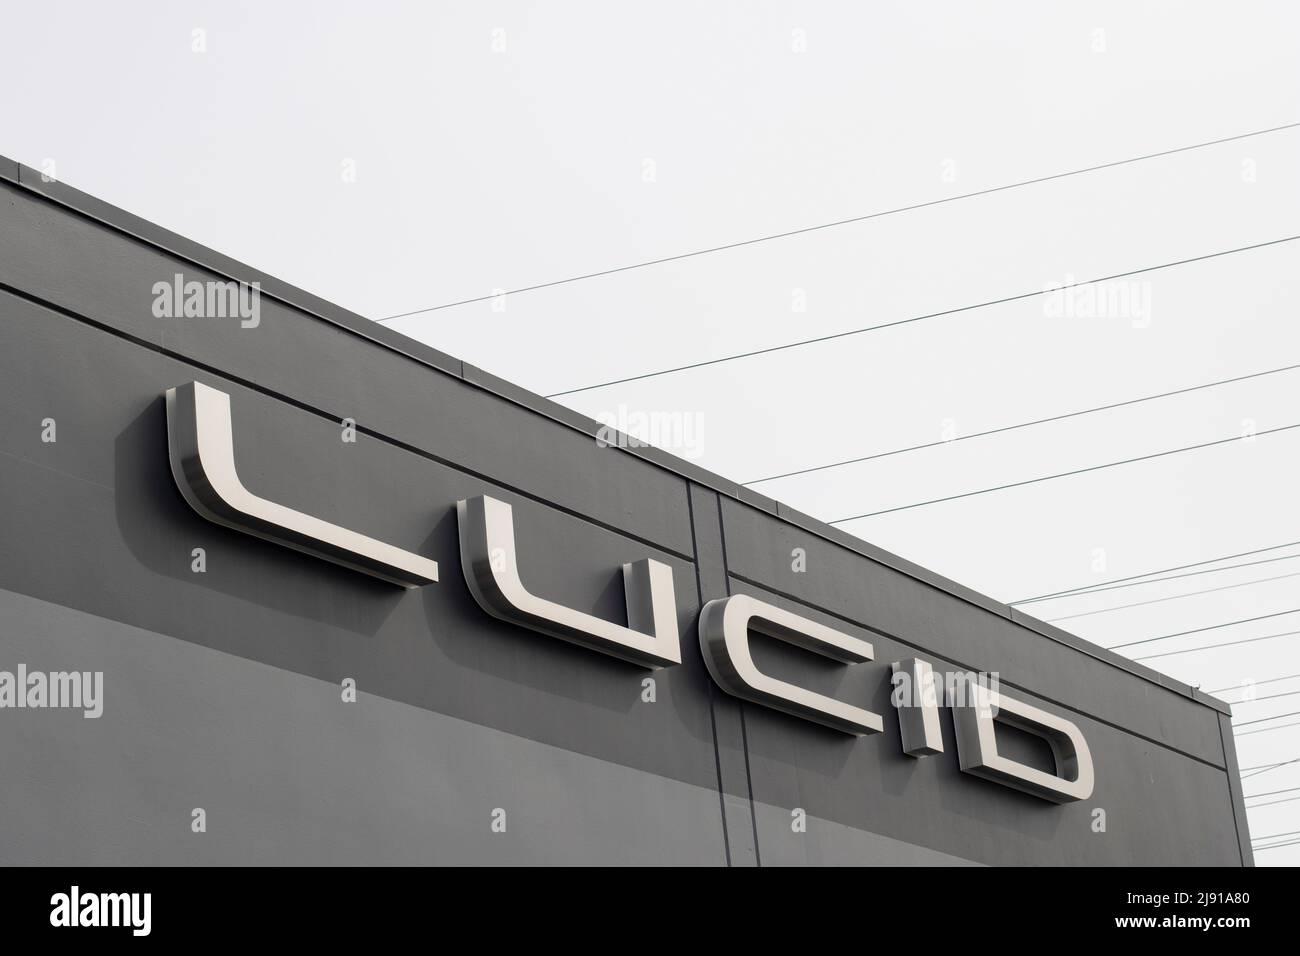 Closeup of the Lucid logo seen at a Lucid showroom in Millbrae, California, on May 5, 2022. Lucid Group Inc. is an American electric vehicle manufacturer. Stock Photo